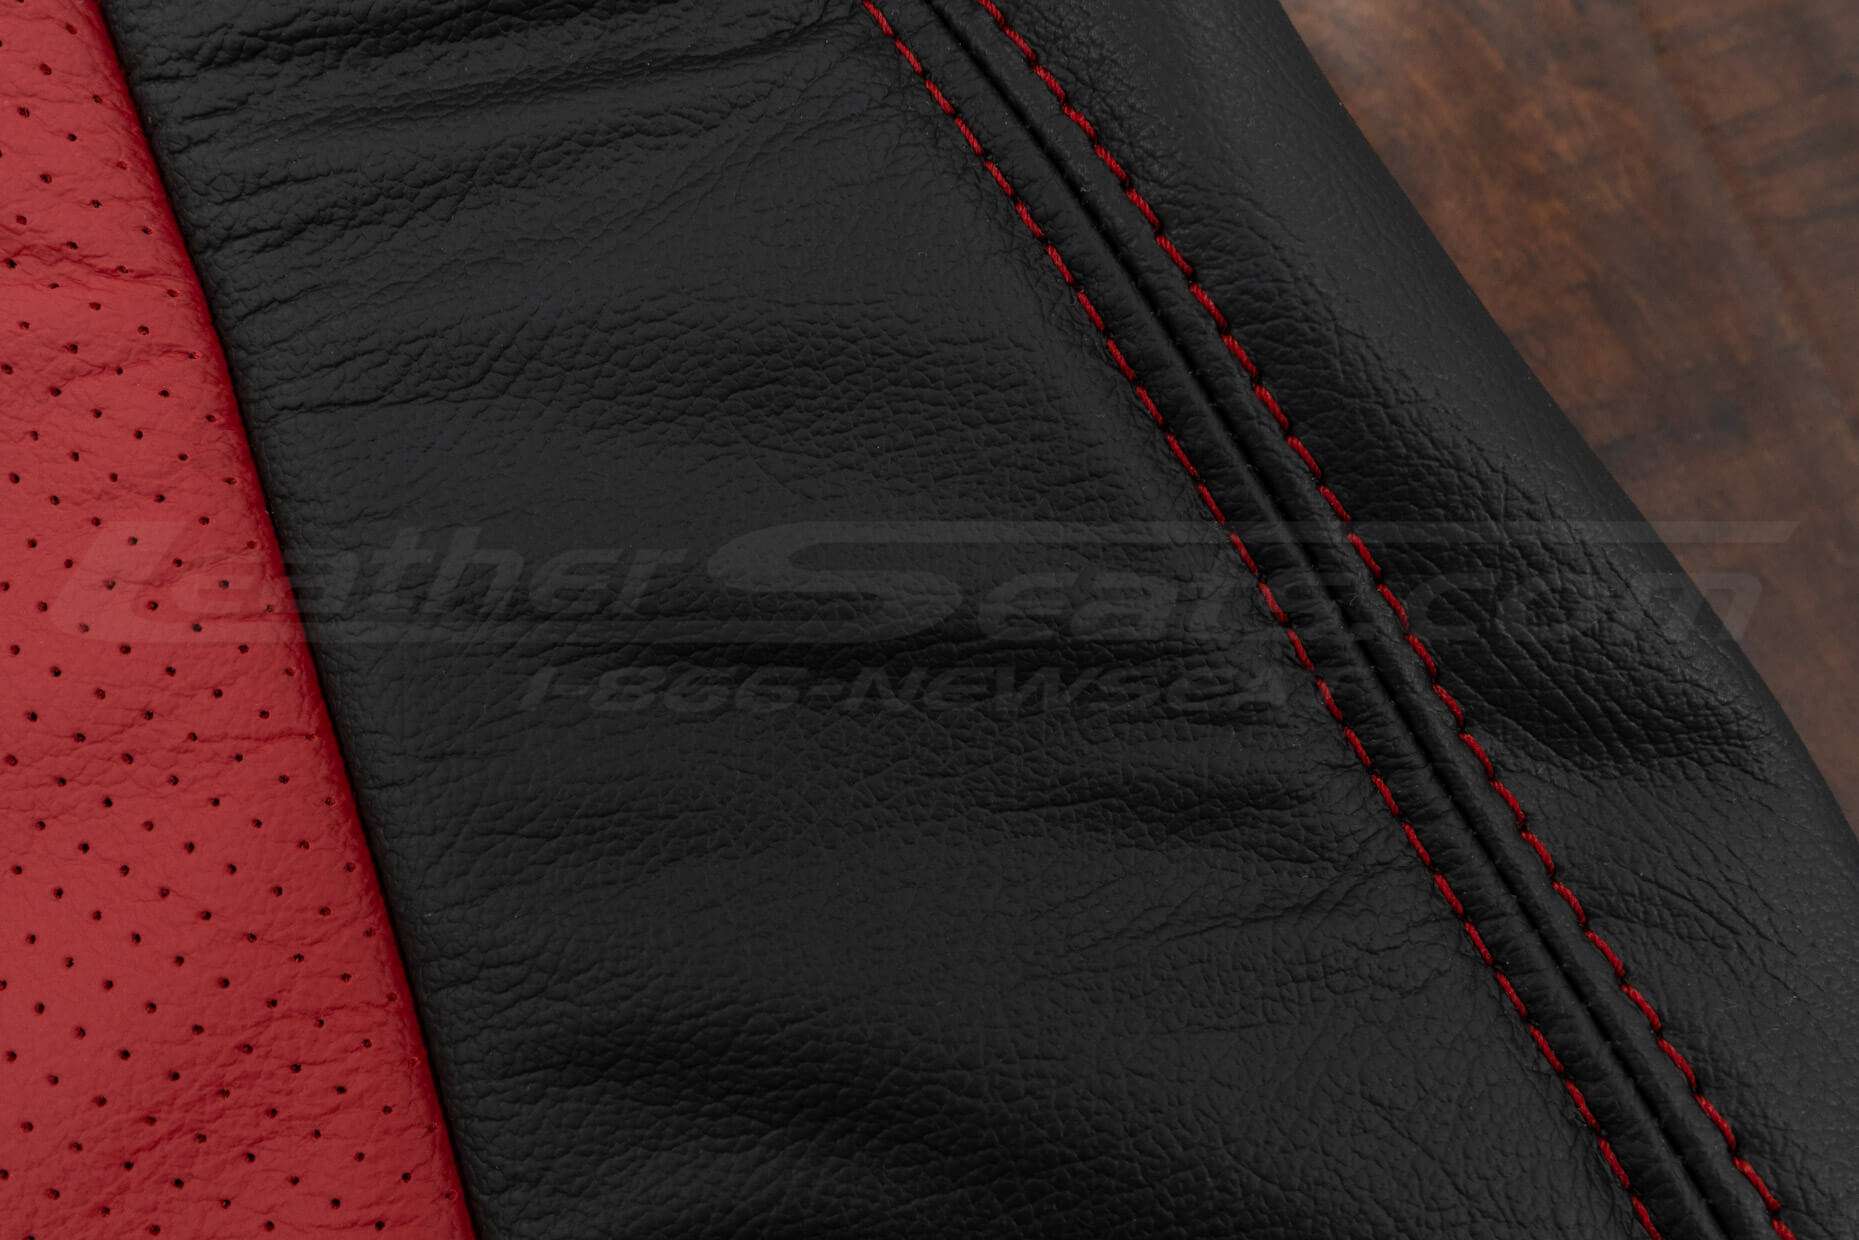 Contrasting double-stitching in Red